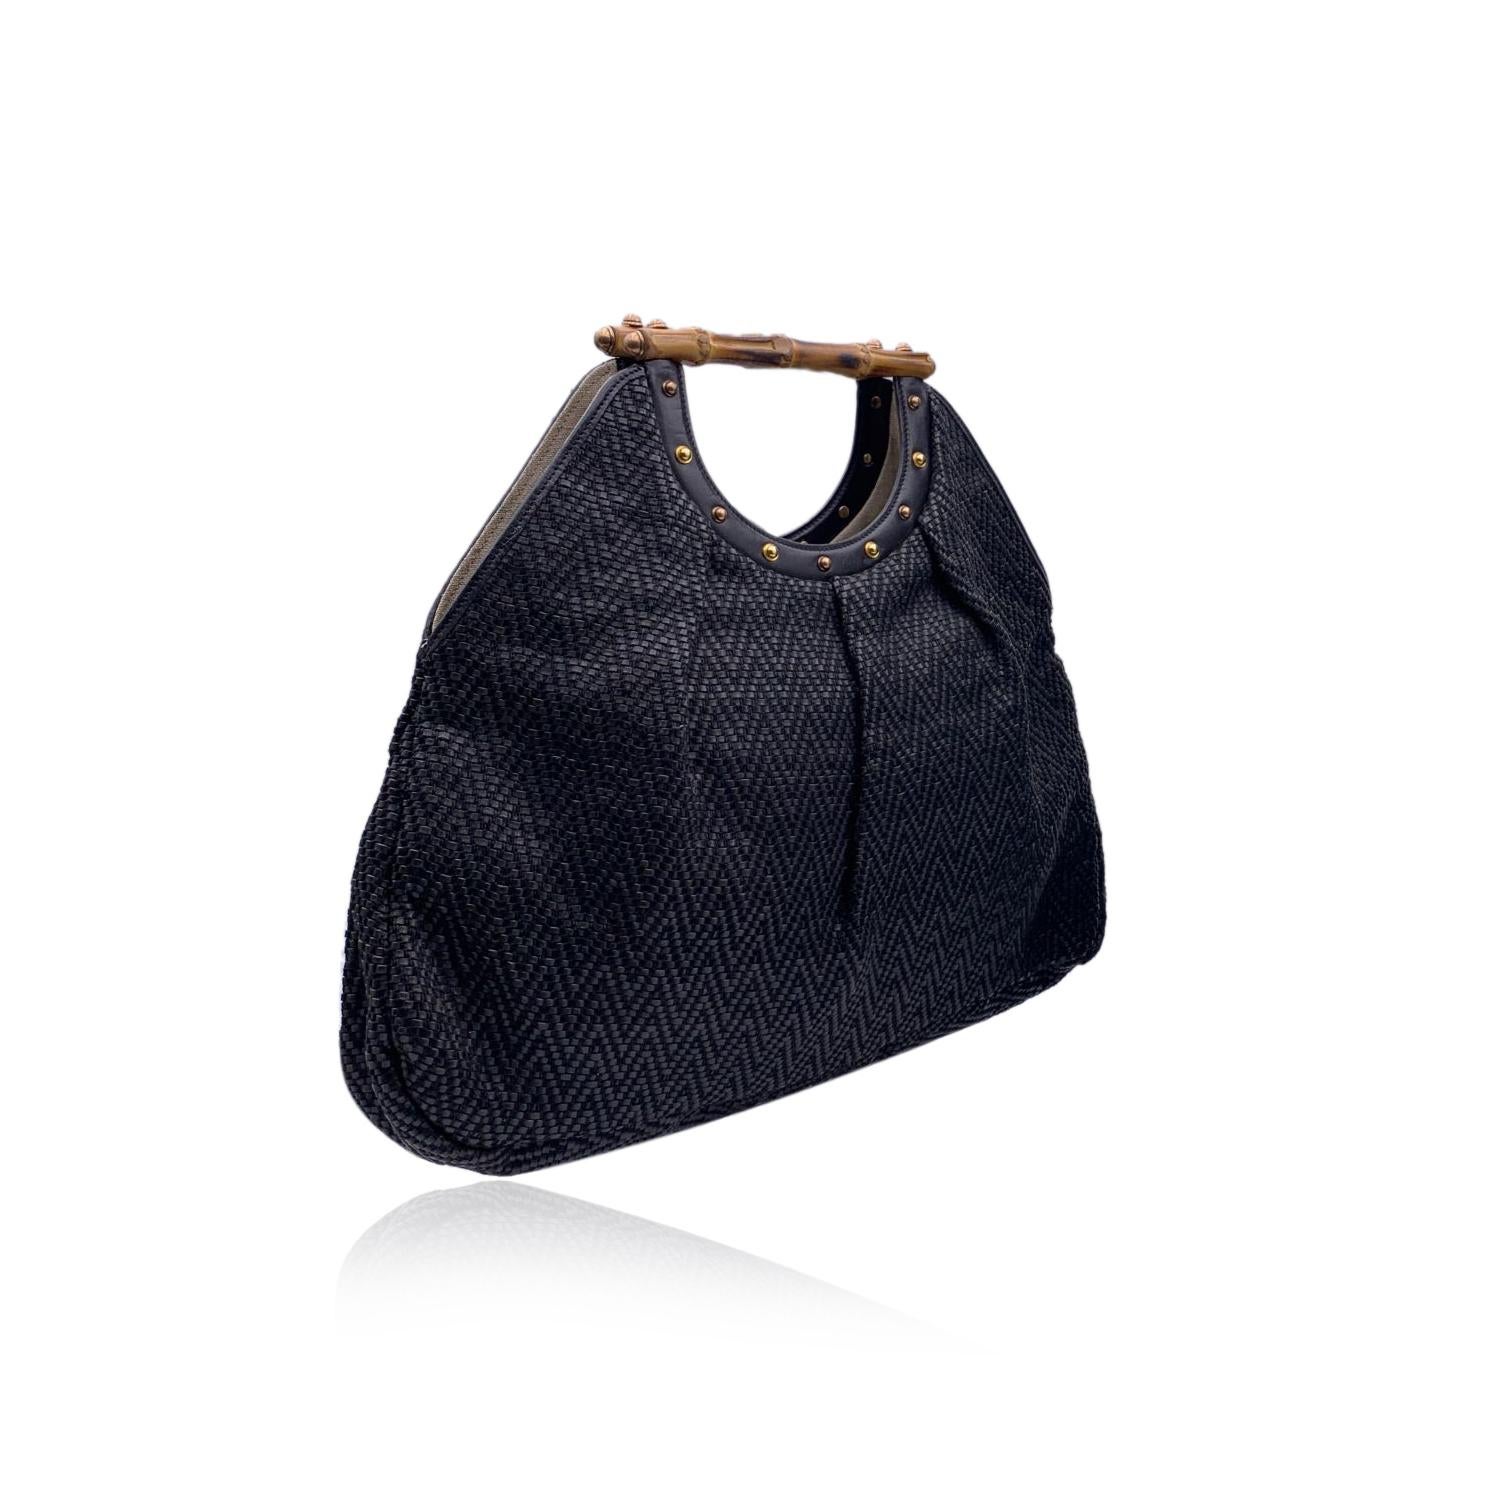 Beautiful Gucci Bamboo tote bag in black color. Crafted from woven leather and thread, with chevron pattern. Double distinctive Bamboo handle. Gold metal studs on the front and on the back. Open top. Beige fabric lining. 1 side zip pocket